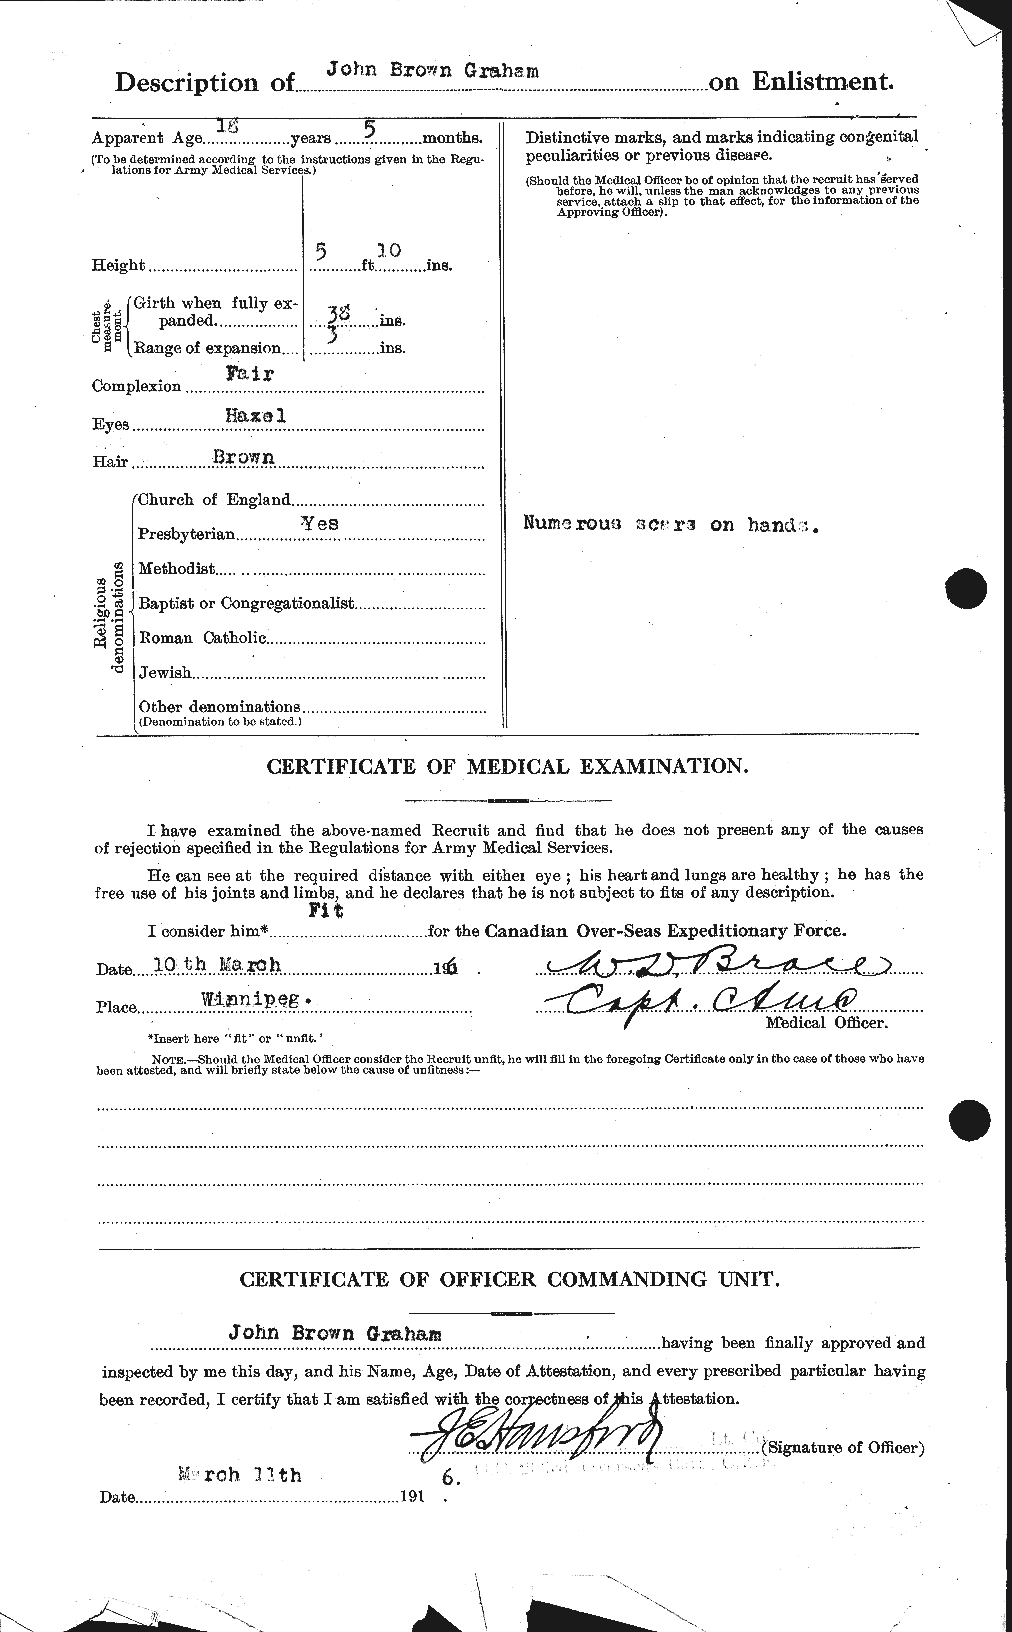 Personnel Records of the First World War - CEF 359157b